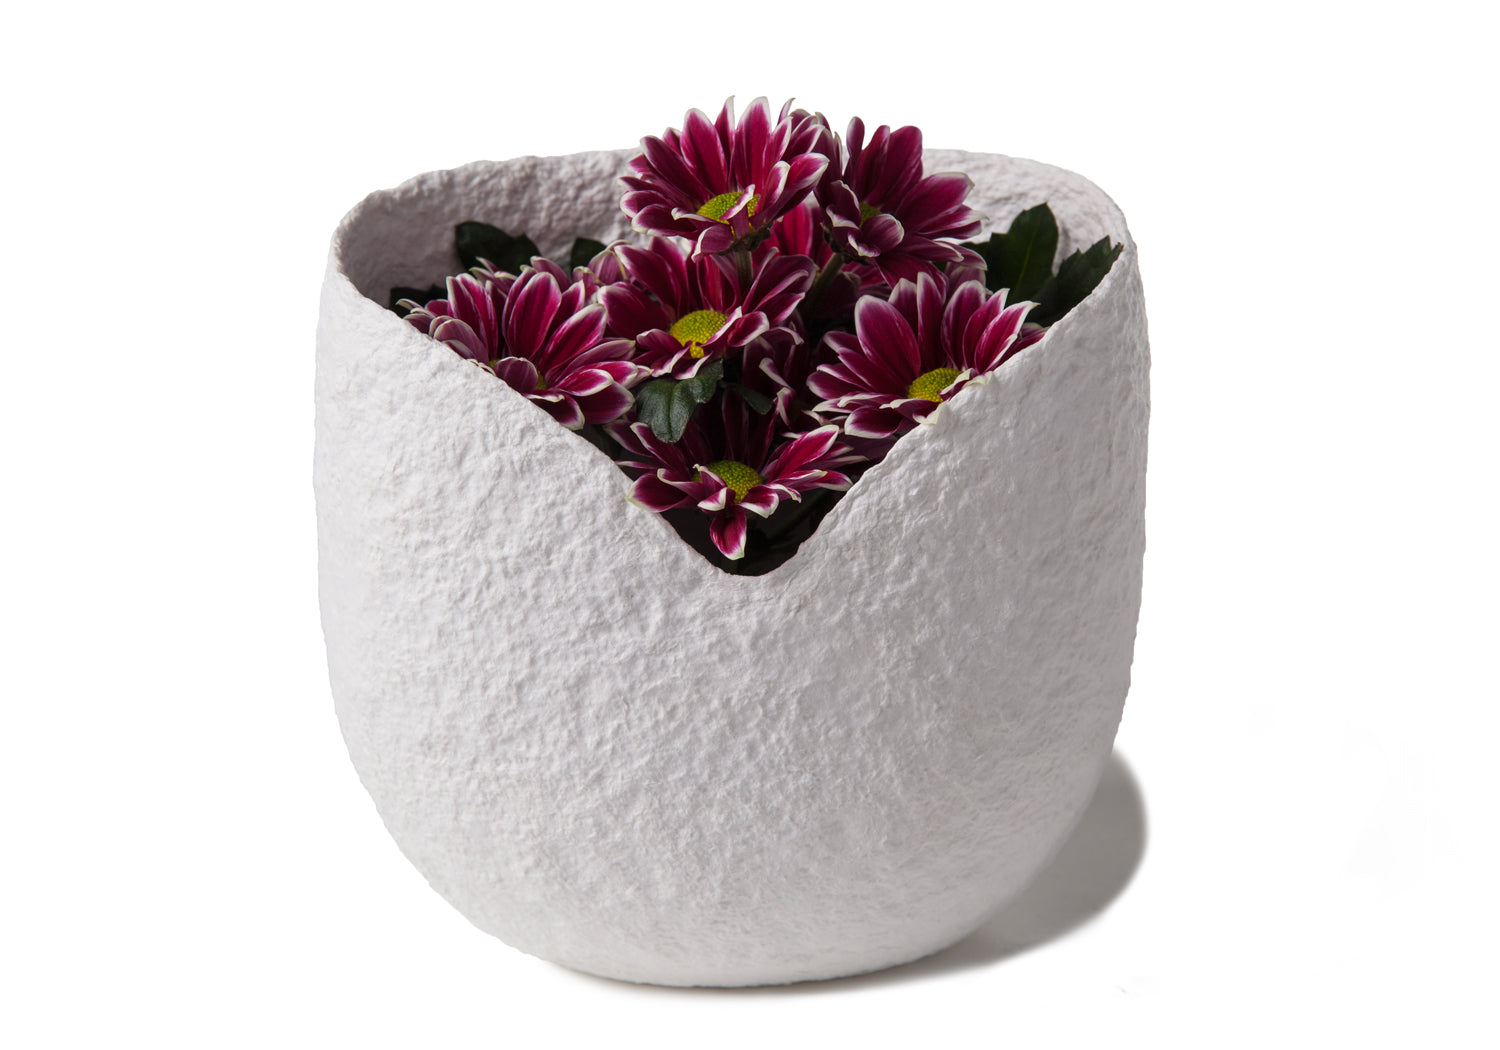 Picture of a white biodegrdable coton fibre cremation urn resembling a Moses basket for children on sale at Muses Design Urns. View with flowers A.